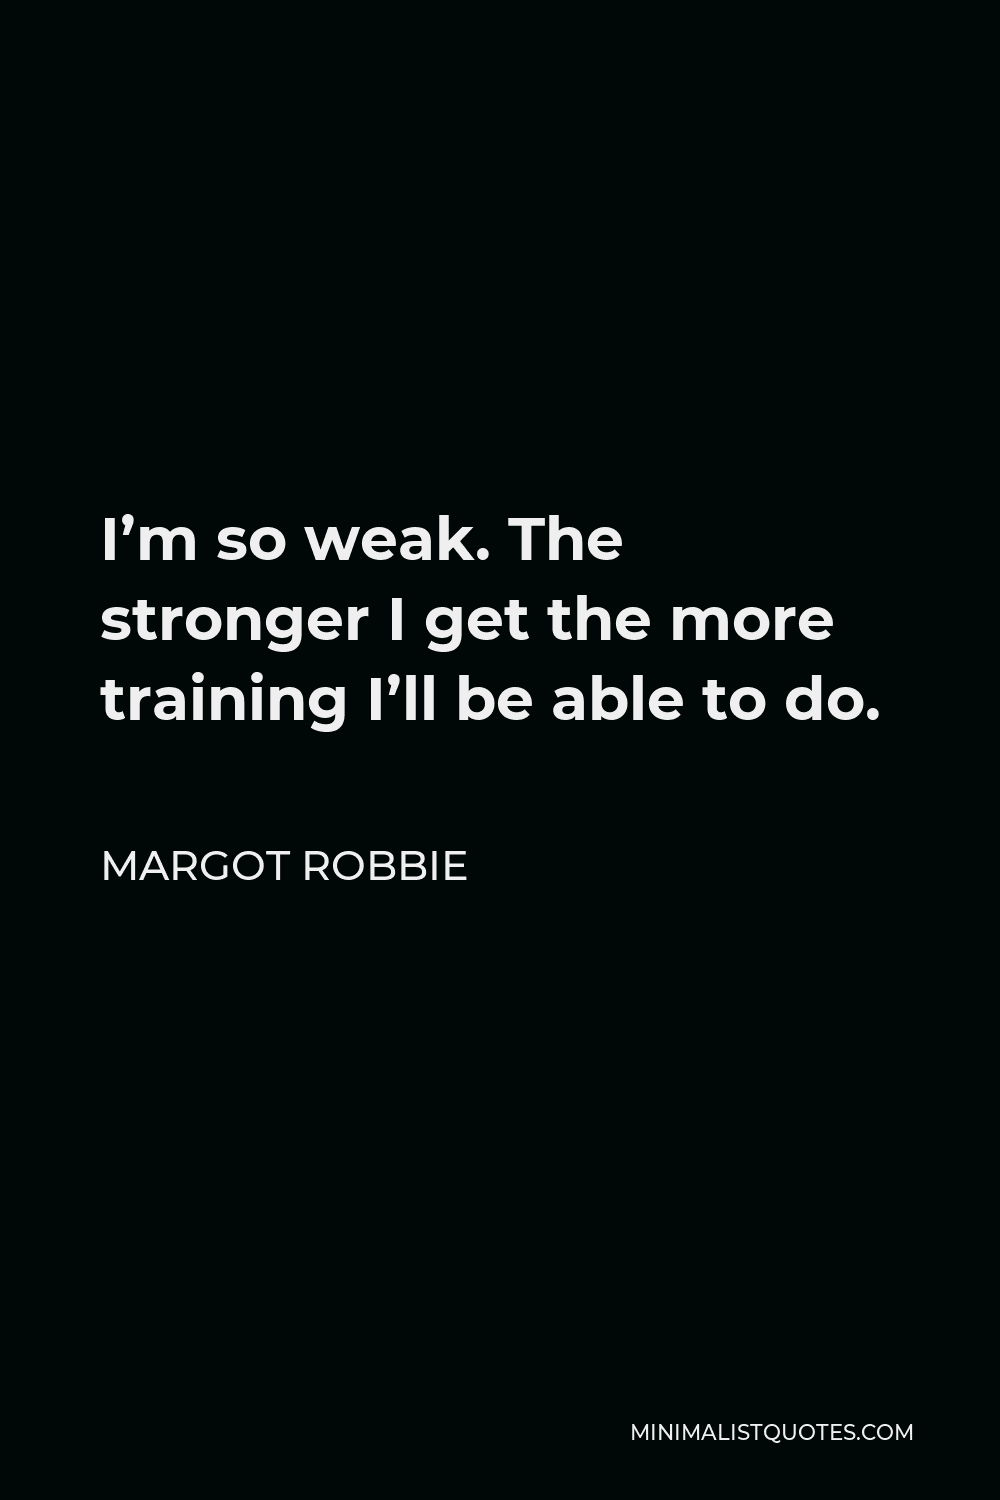 Margot Robbie Quote - I’m so weak. The stronger I get the more training I’ll be able to do.